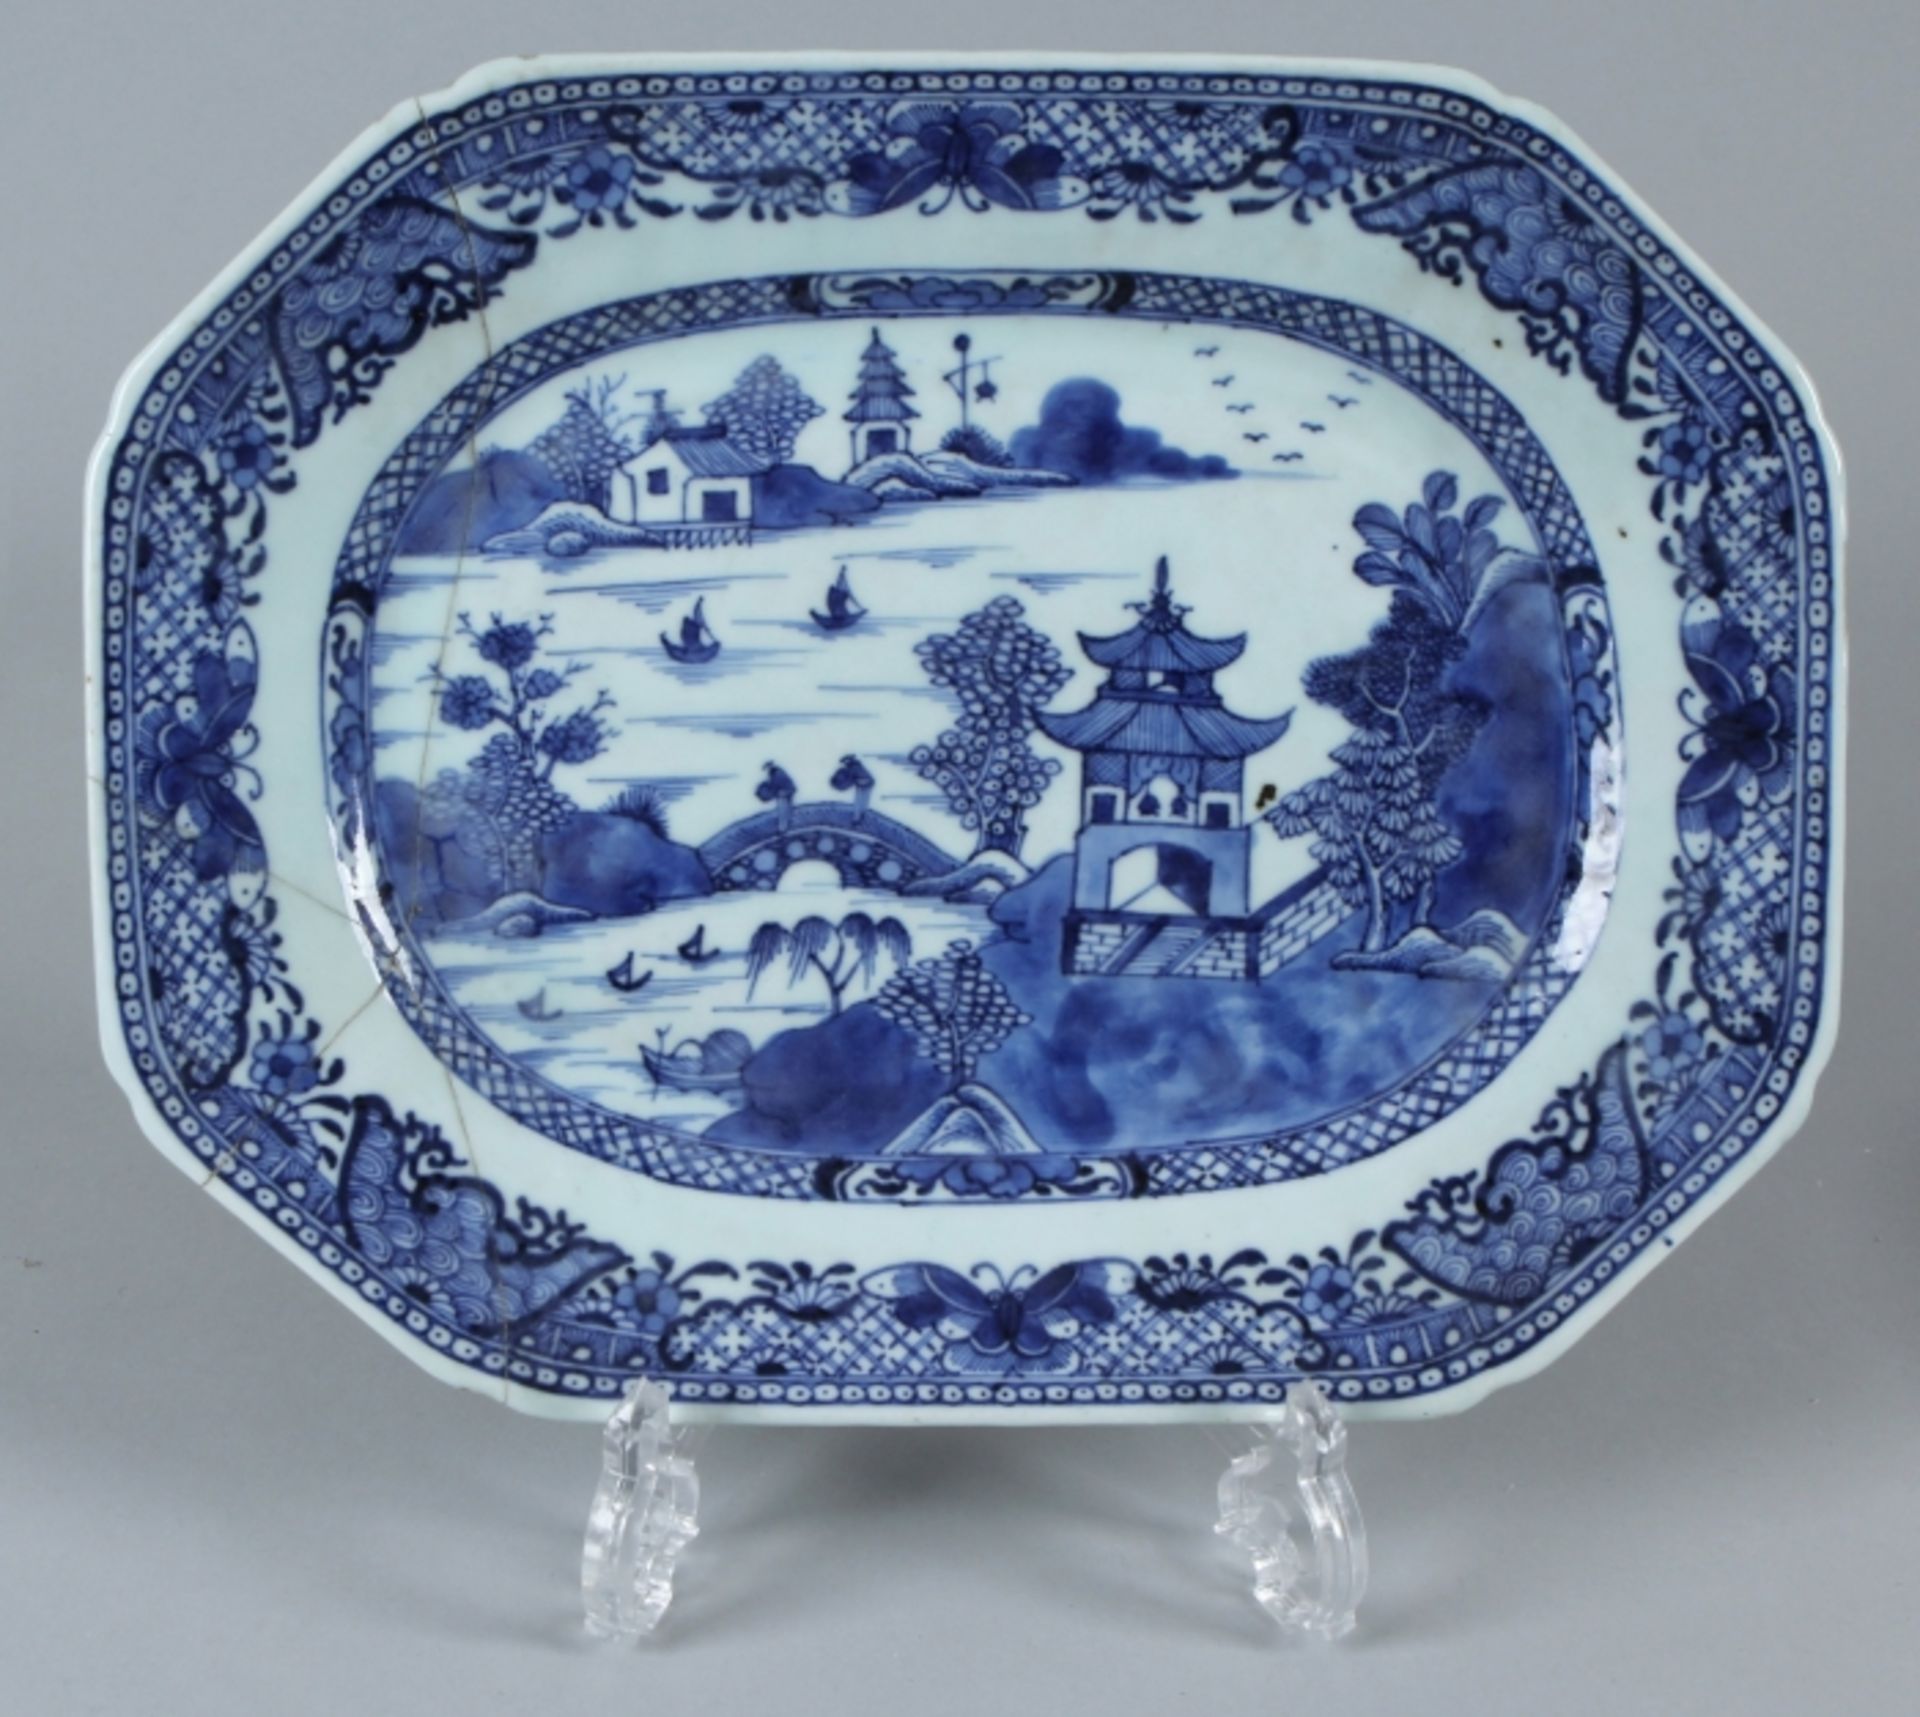 Chinese 18th century porcelain meat dish, Queng Long with landscape scenery 32,7x25,2cm. Glued